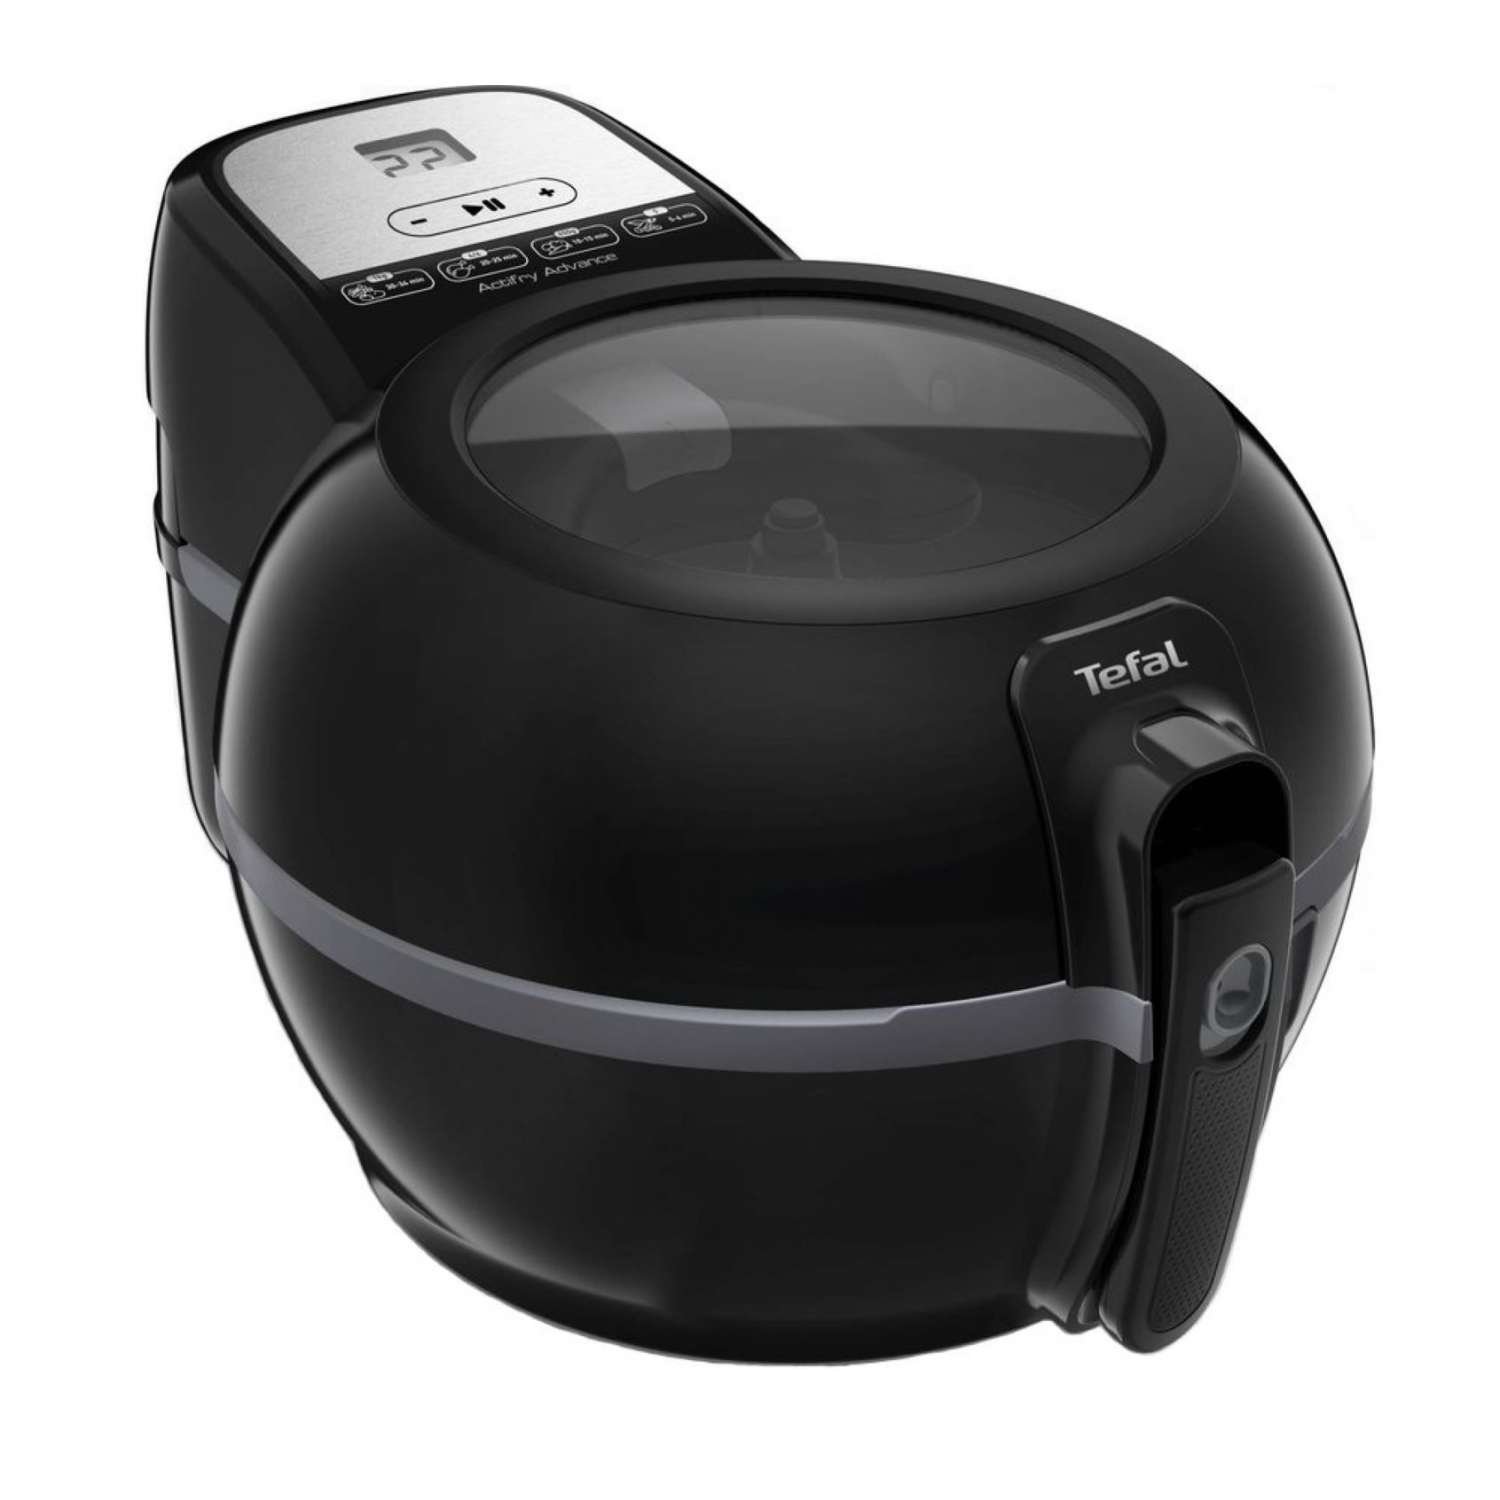 Tefal - Actifry Extra Black FZ7228 Healthy Air Fryer, 1.2 kg Capacity for  up to 6 People, Low Oil, Odourless, 300 Recipes